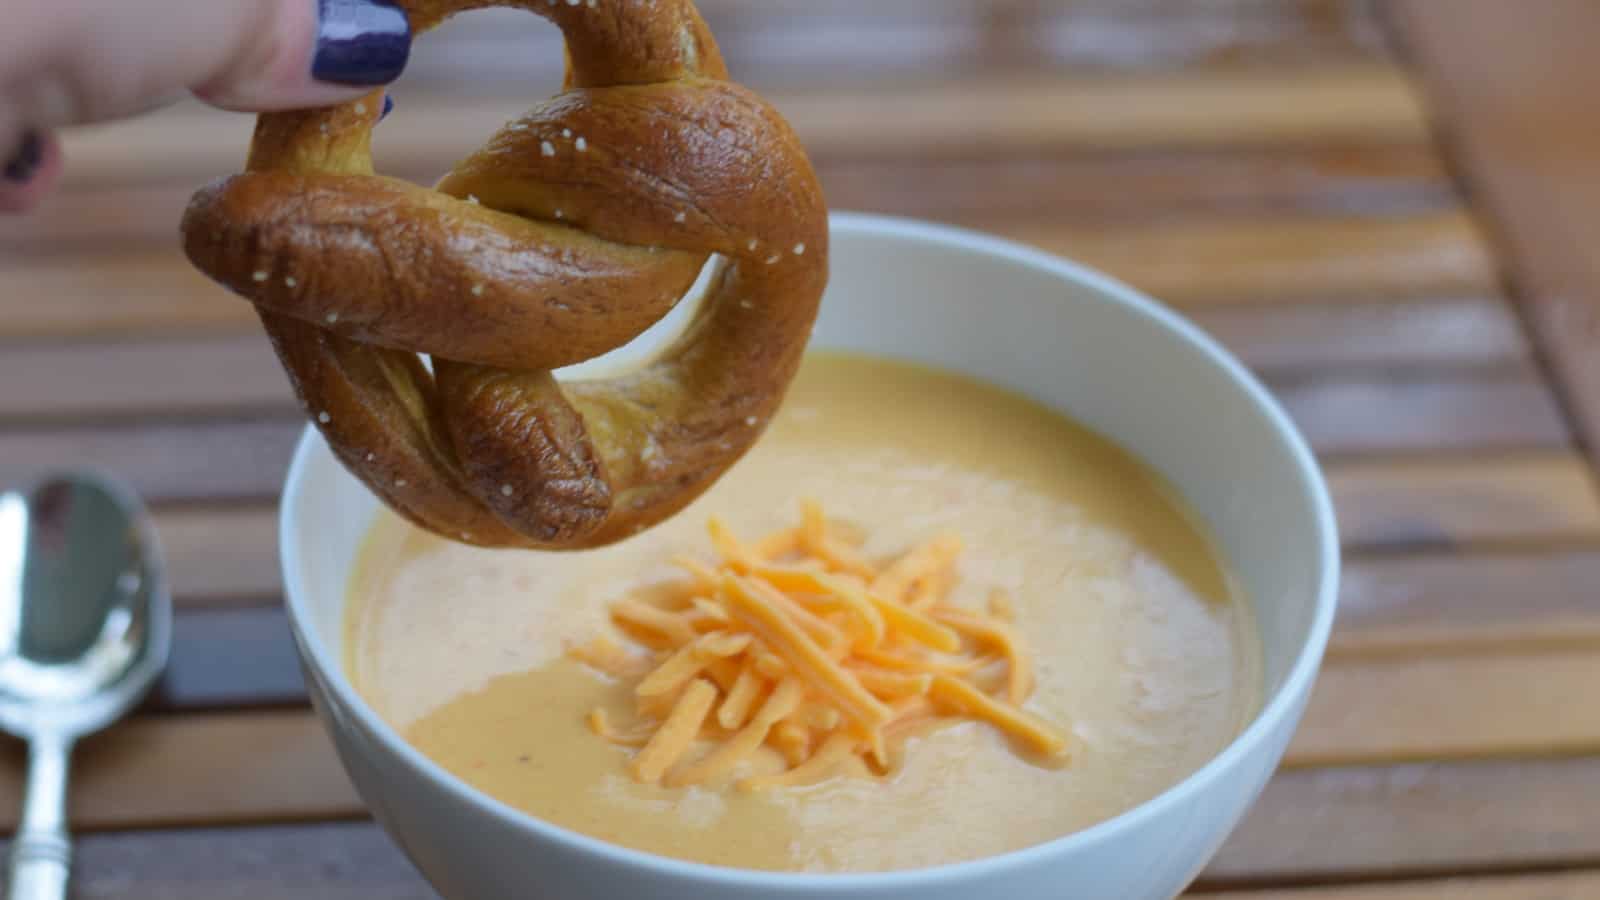 Image shows Pretzel dipping into beer cheese soup.